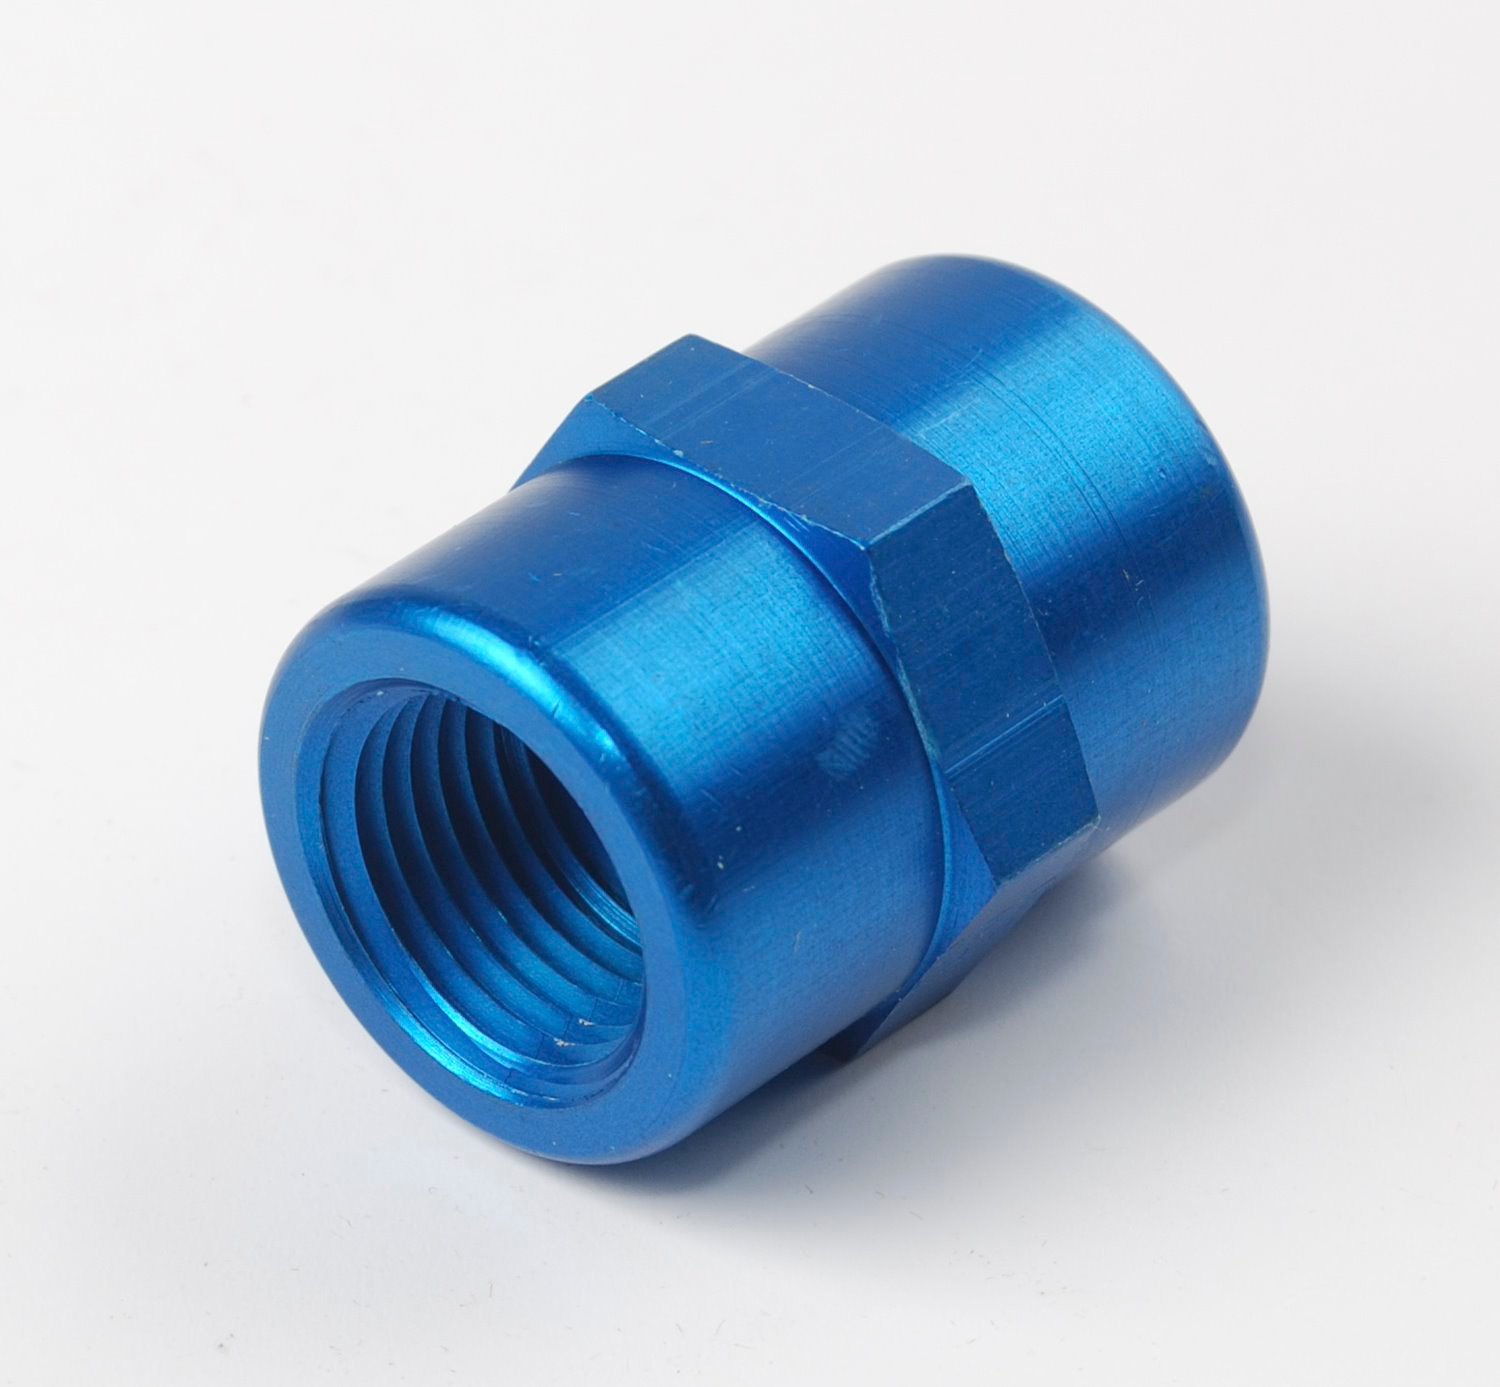 NPT to NPT Union Fitting [1/2 in. NPT Female to 1/2 in. NPT Female, Blue]